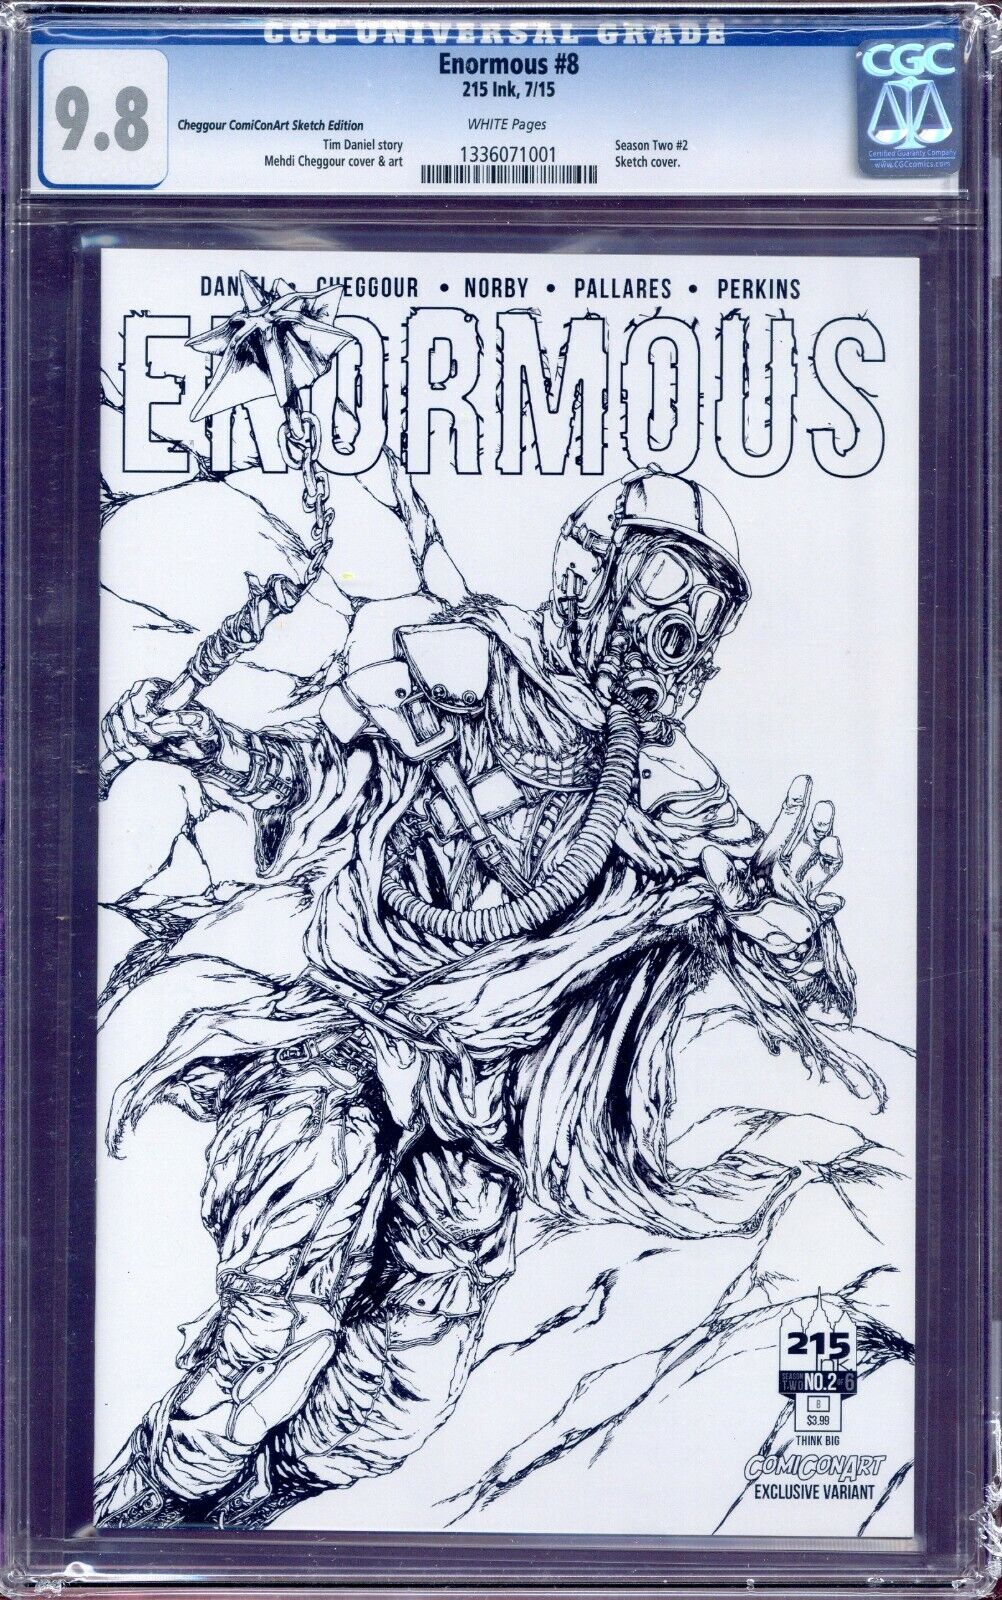 Enormous #8 - CGC 9.8 - Rare Sketch Cover - 215 Ink